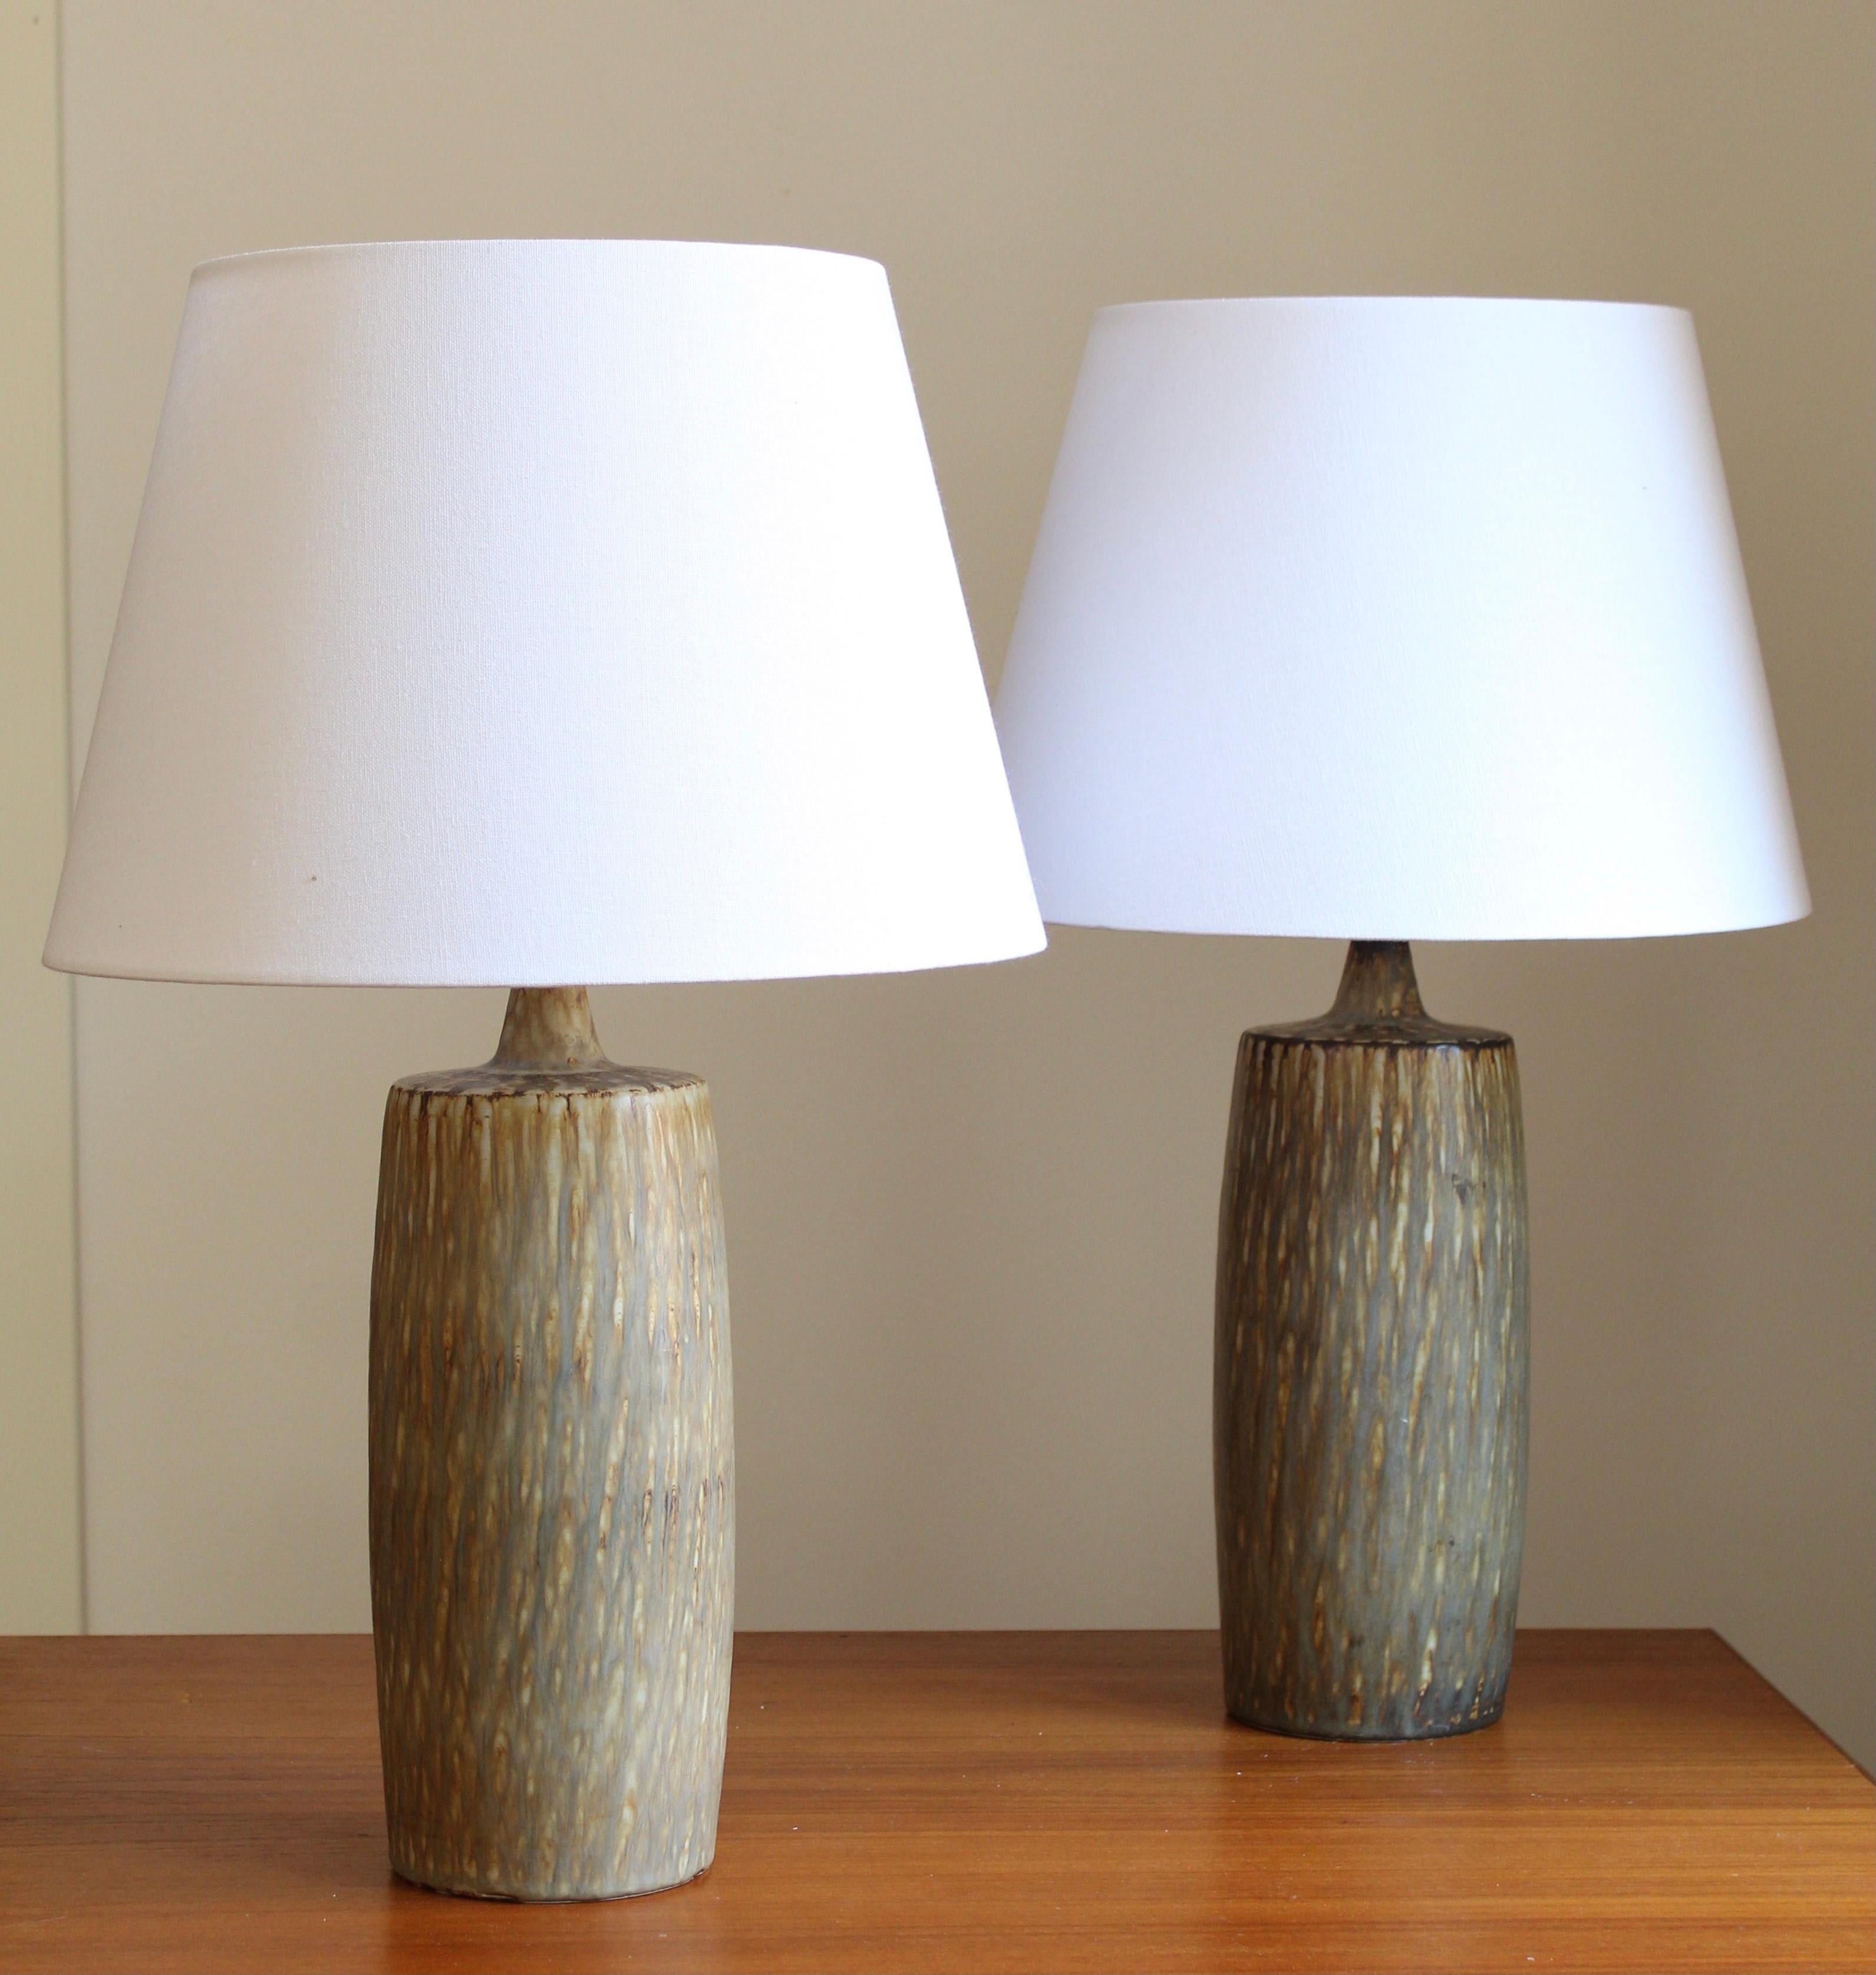 A pair of table lamps produced by Rörstrand, Sweden, 1950s. Designed by Gunnar Nylund, (Swedish, 1914-1997). Signed. Brand new lampshades. Sourced from one estate.

Nylund served as artistic director at Rörstrand, where he worked, 1931-1955. Prior